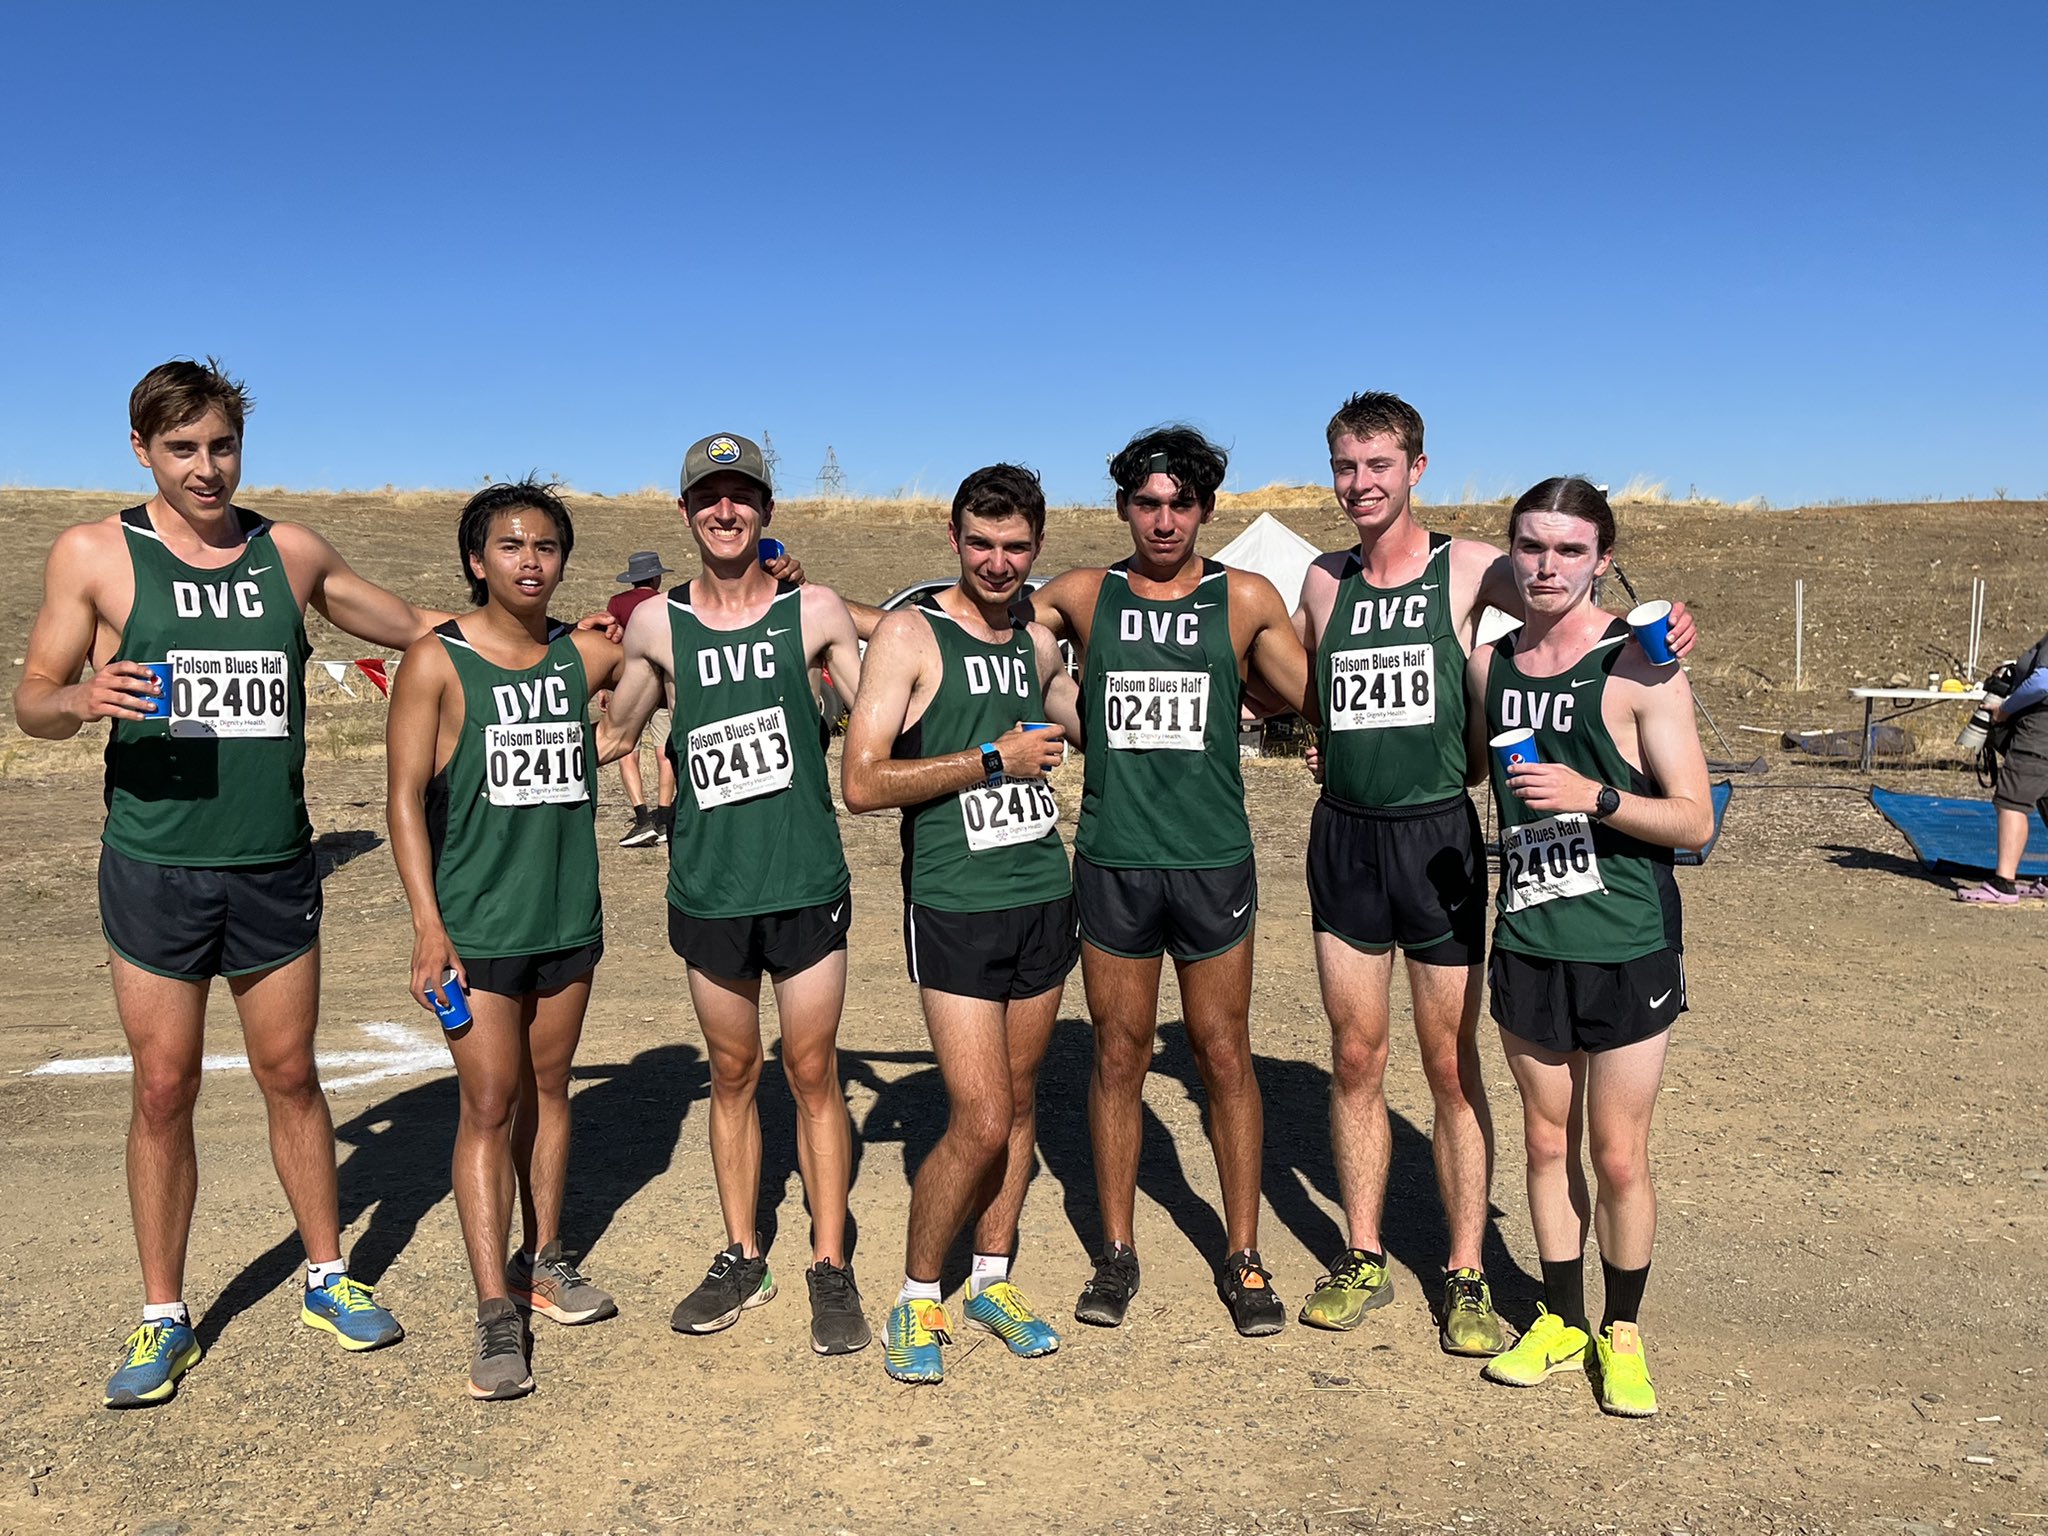 Men's Cross Country wins Big 8 Preview and the Women finish 2nd